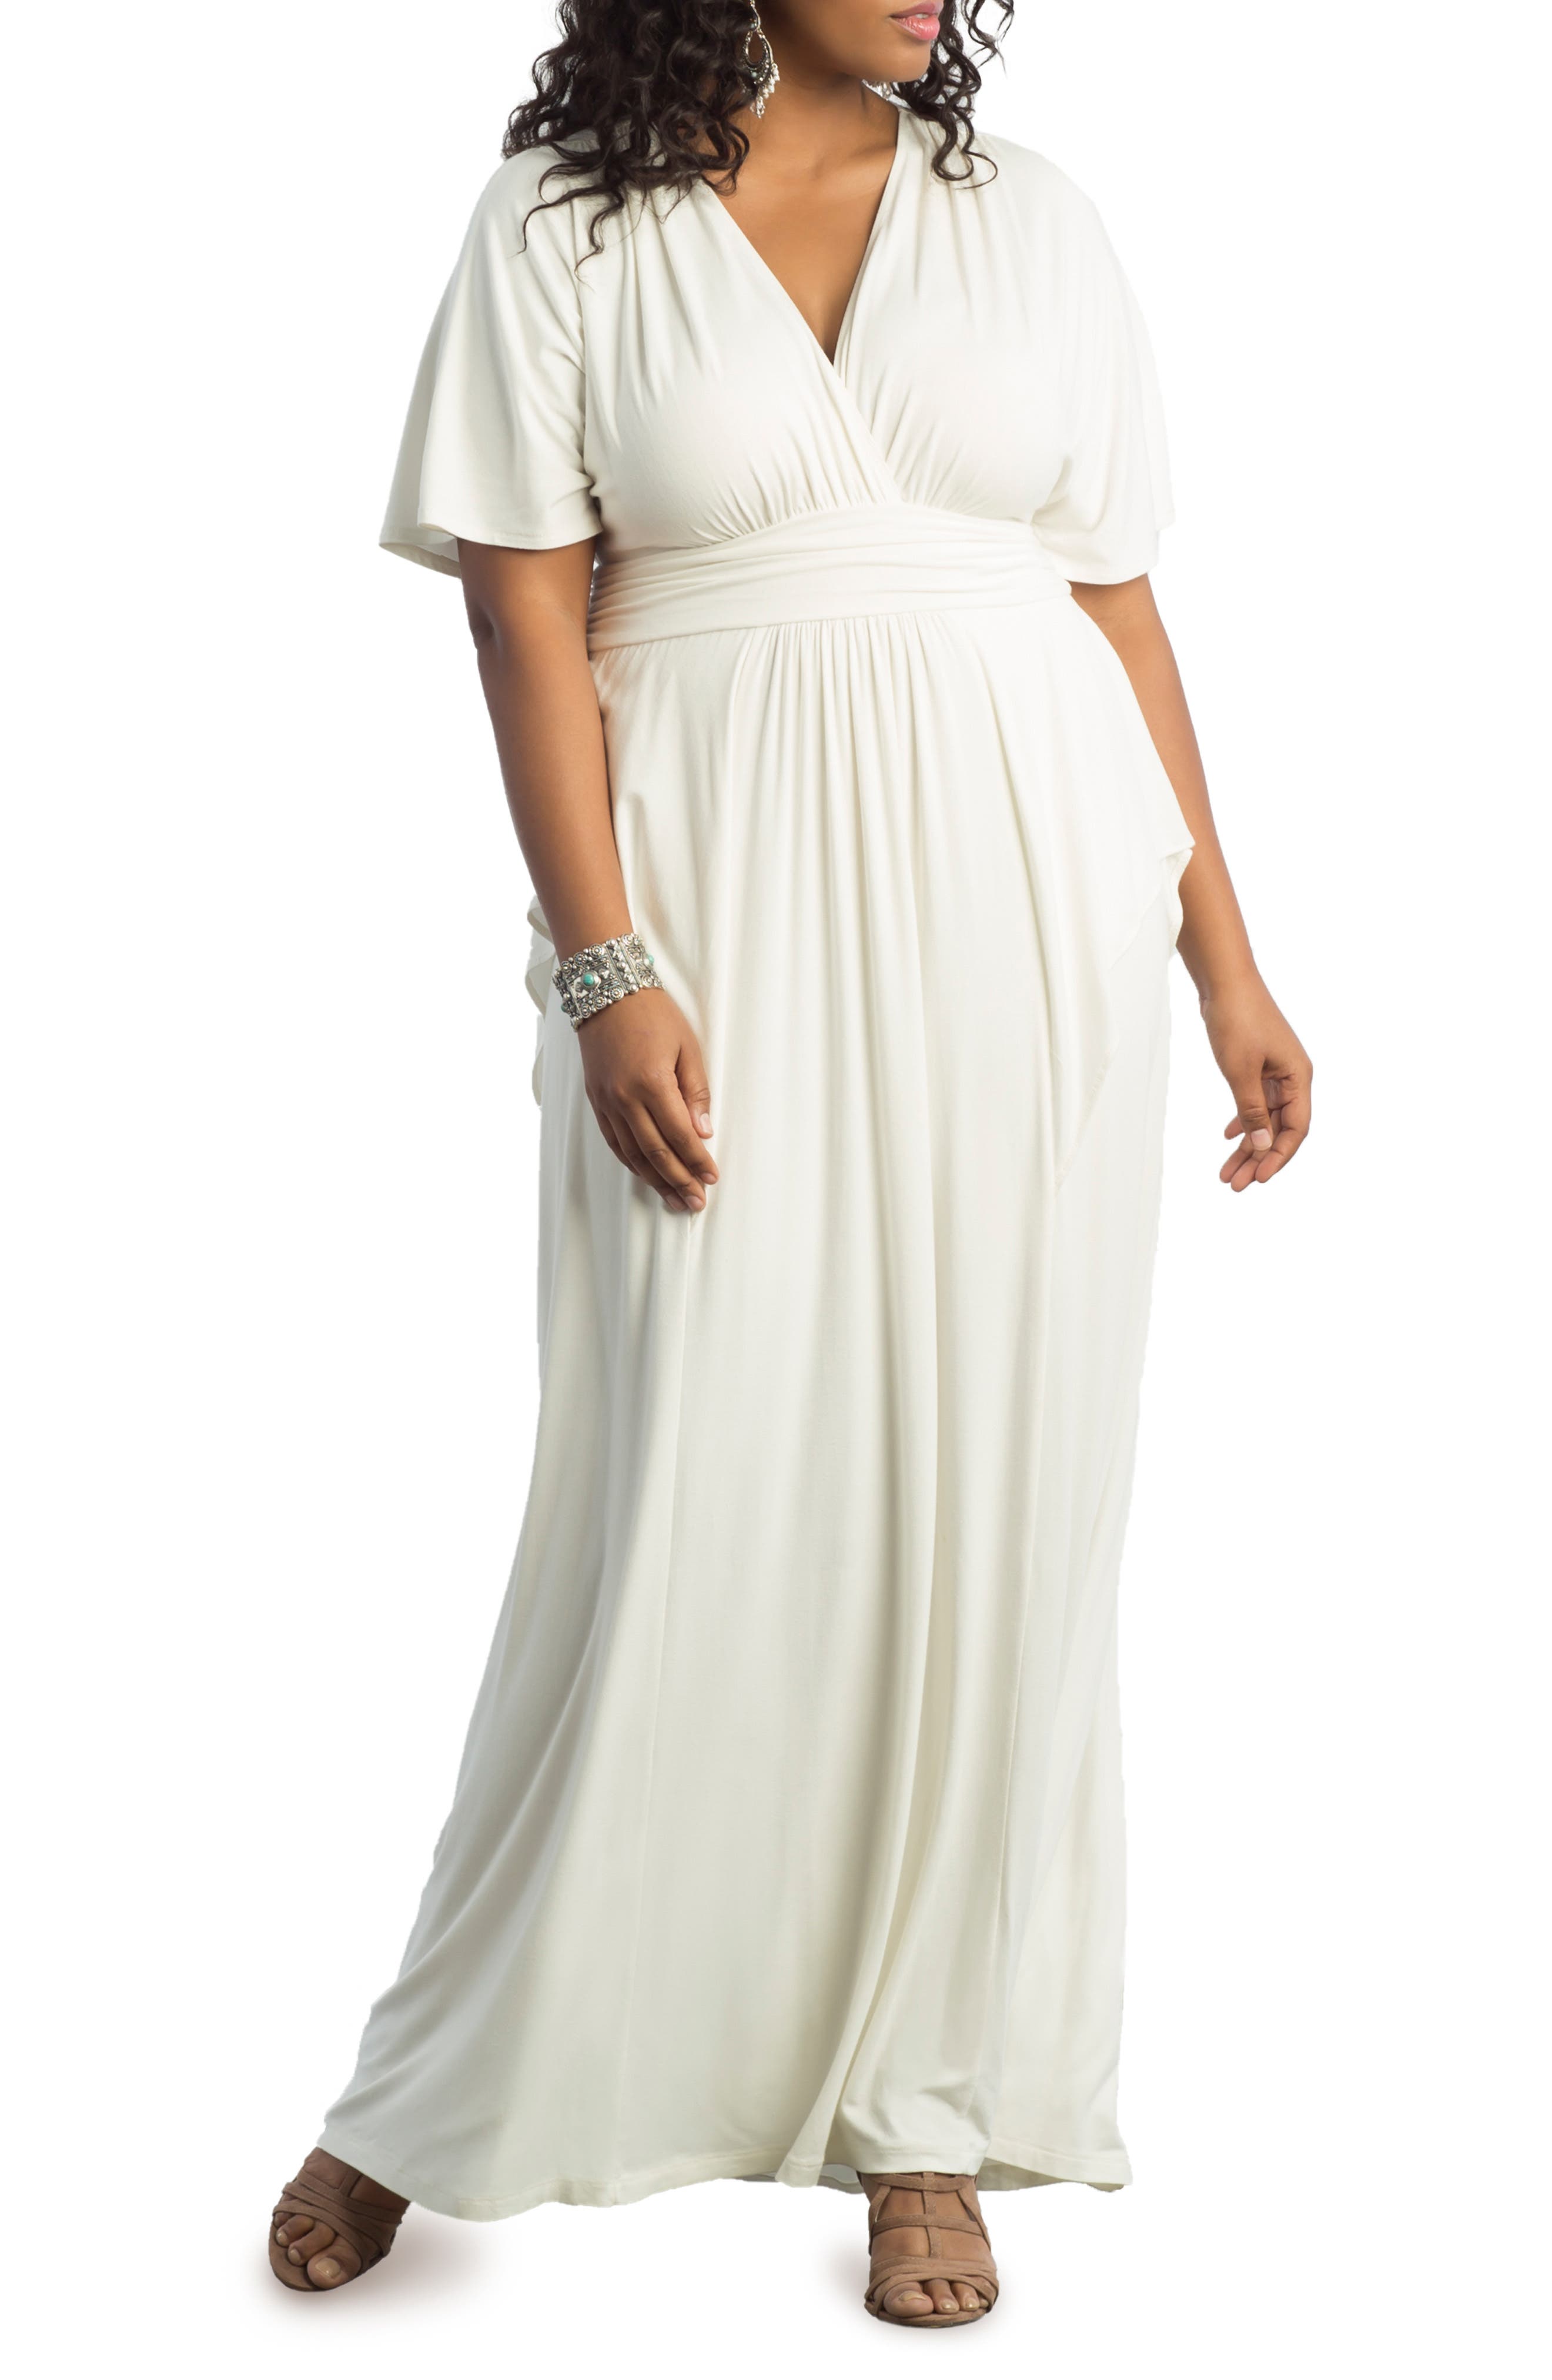 Ivory Plus Size Dresses for Women ...